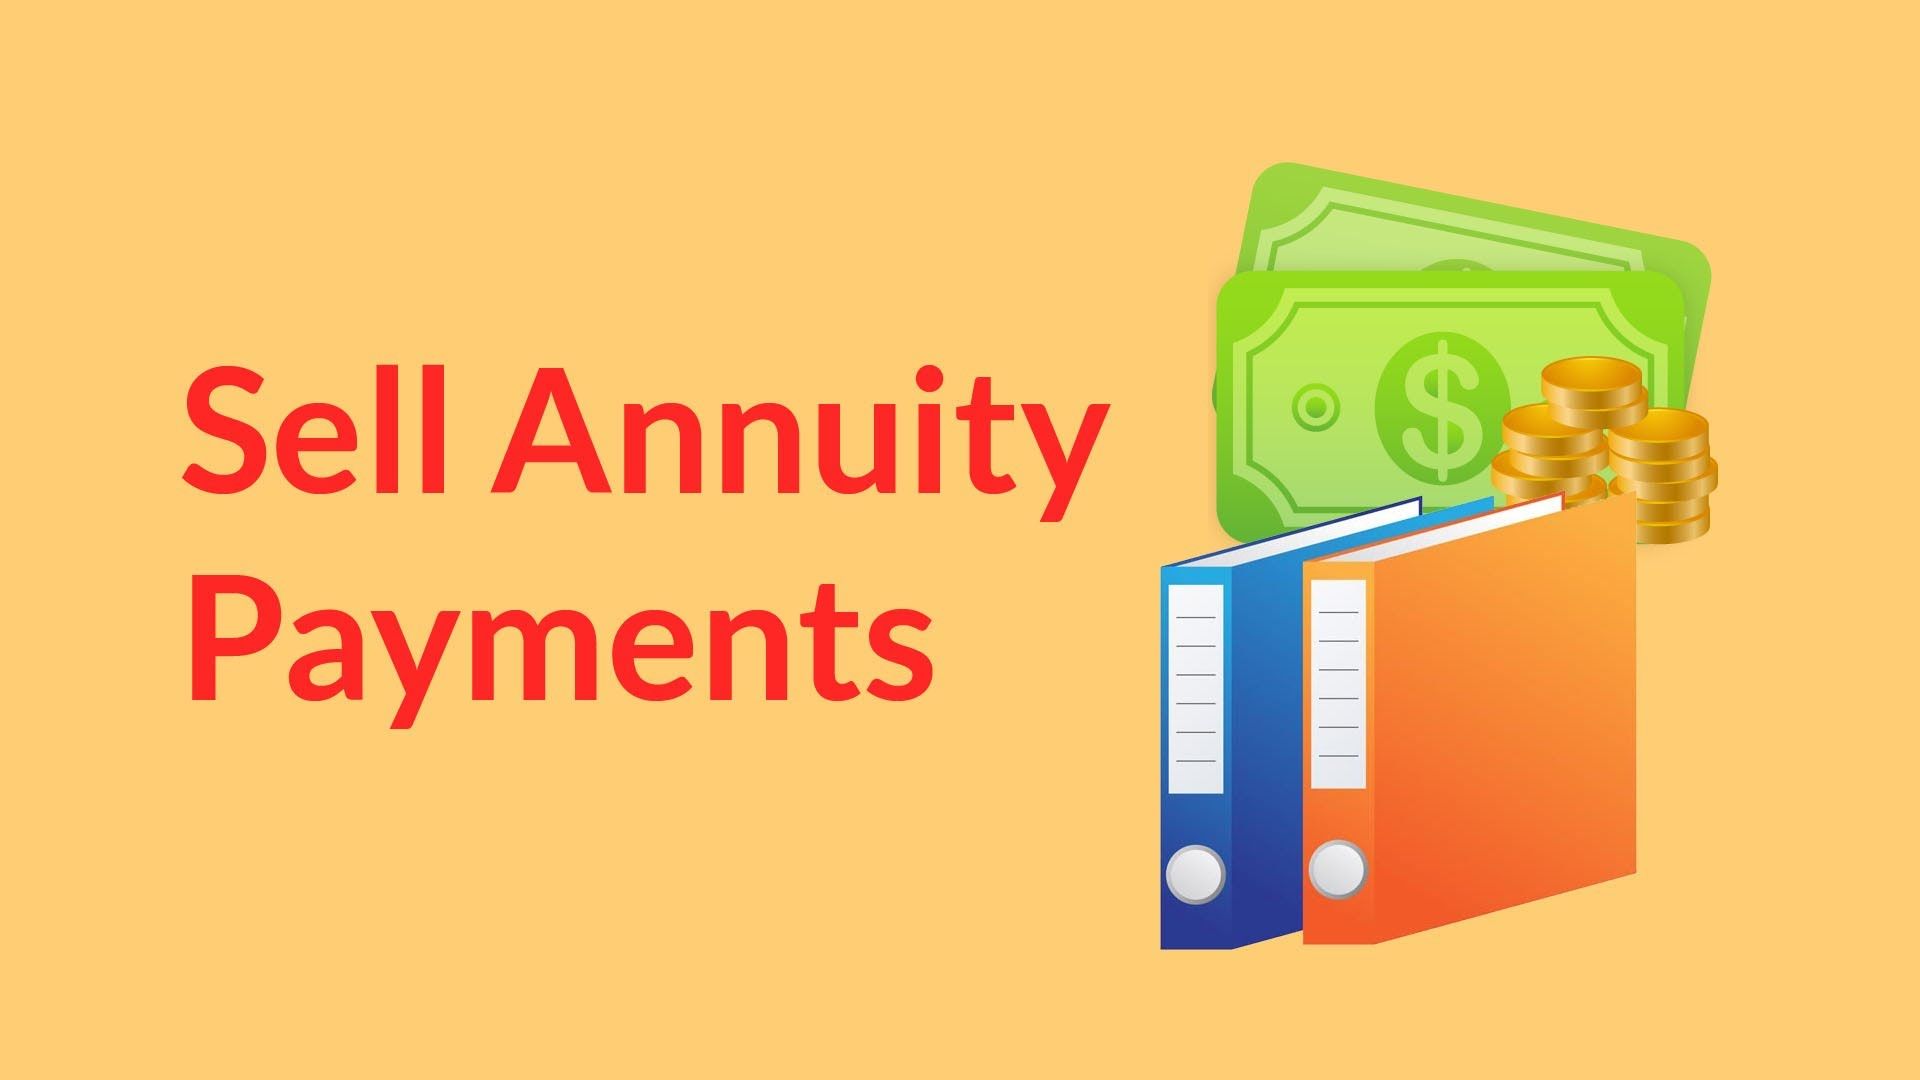 Sell Annuity Payment